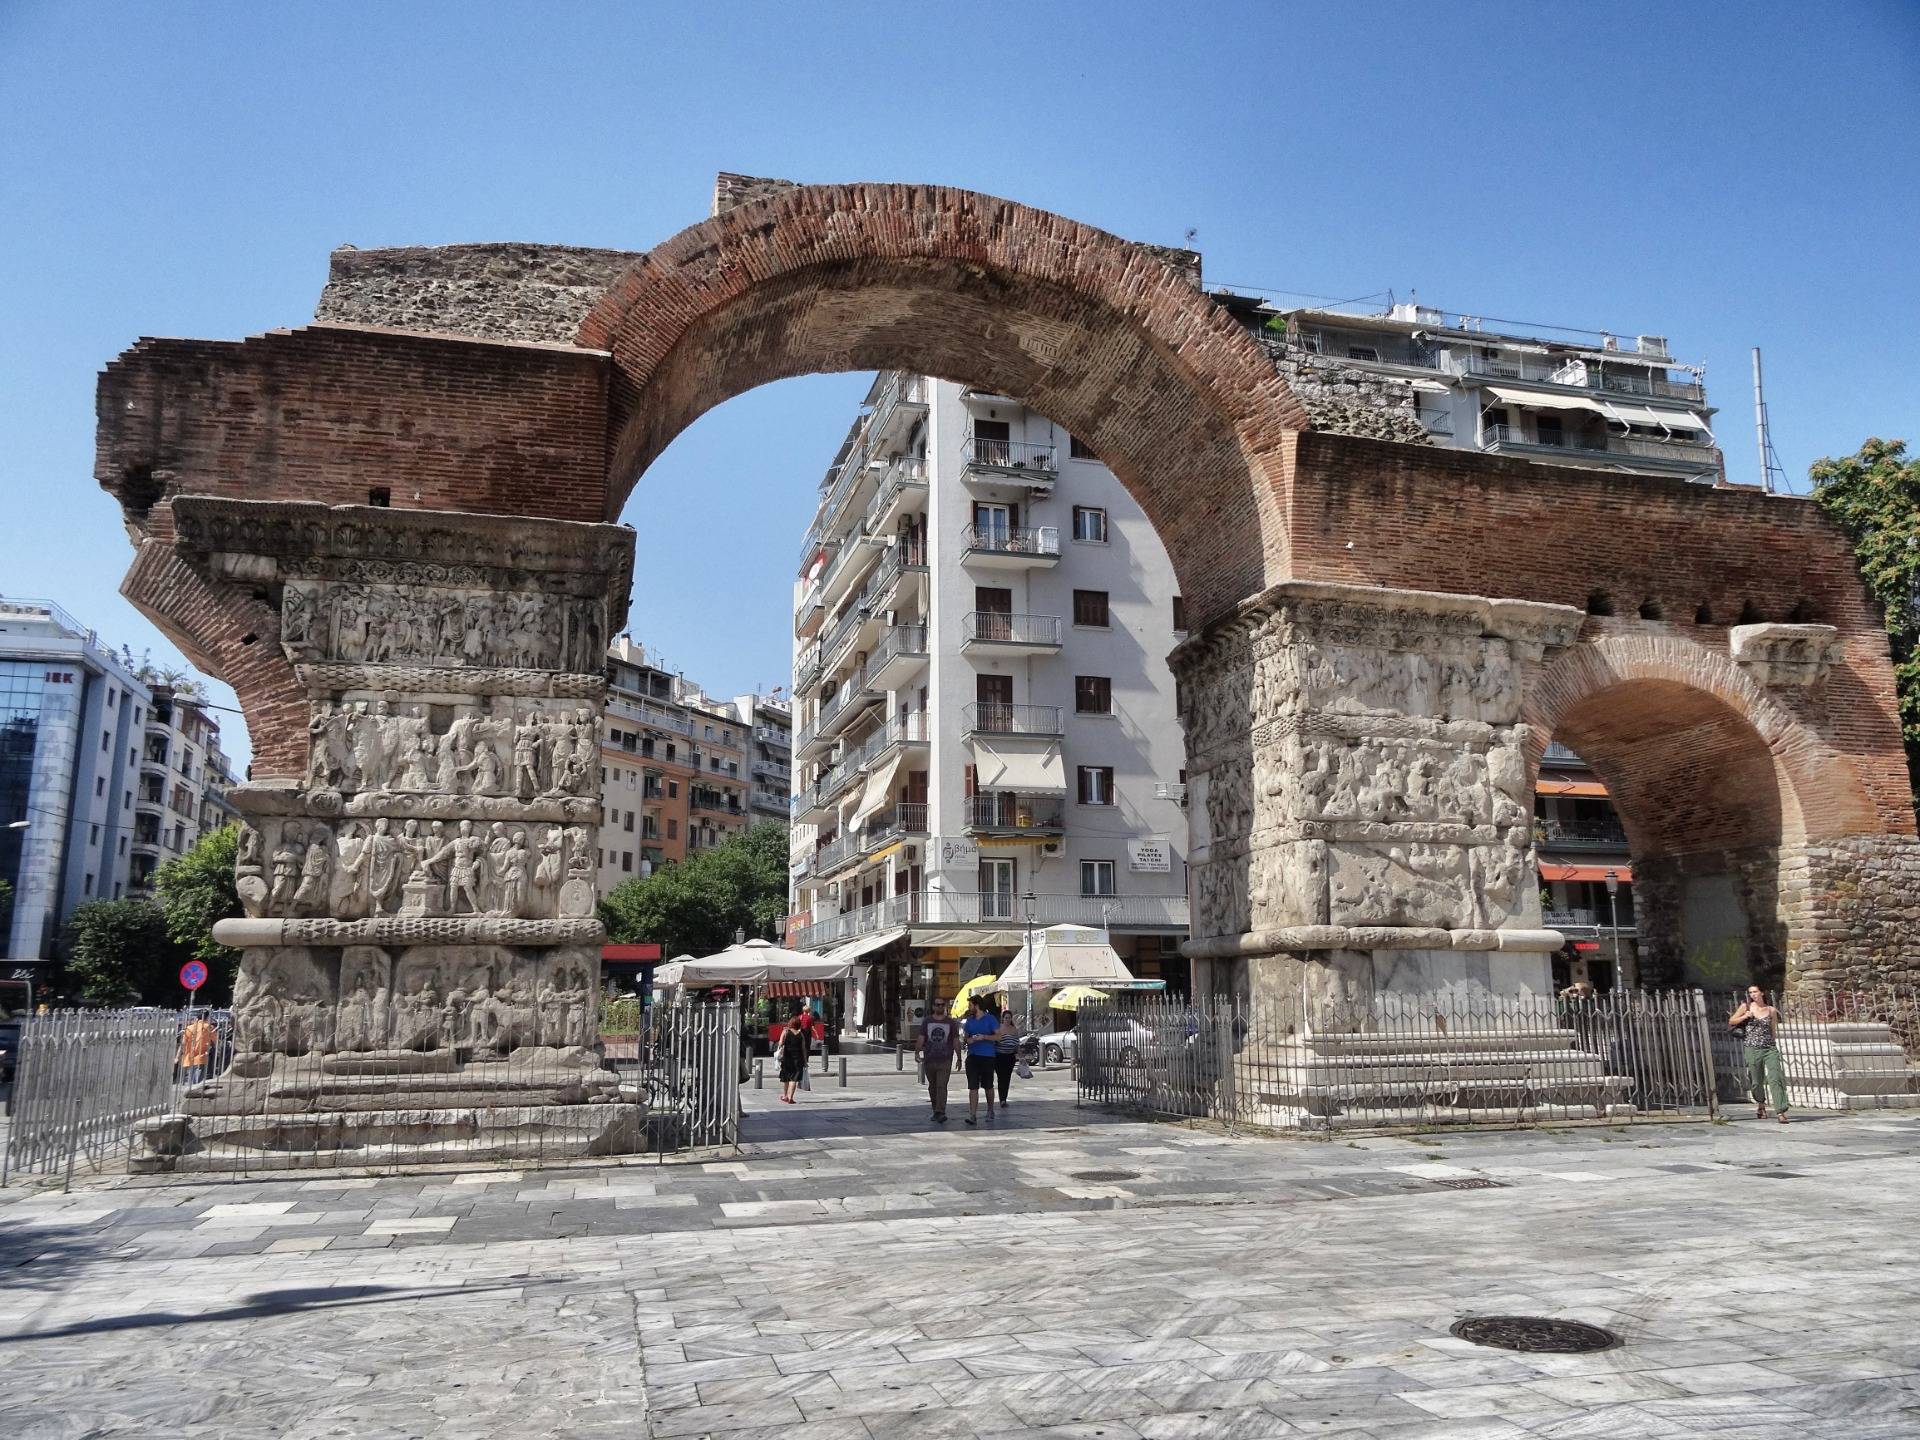 The Arch of Galerius today